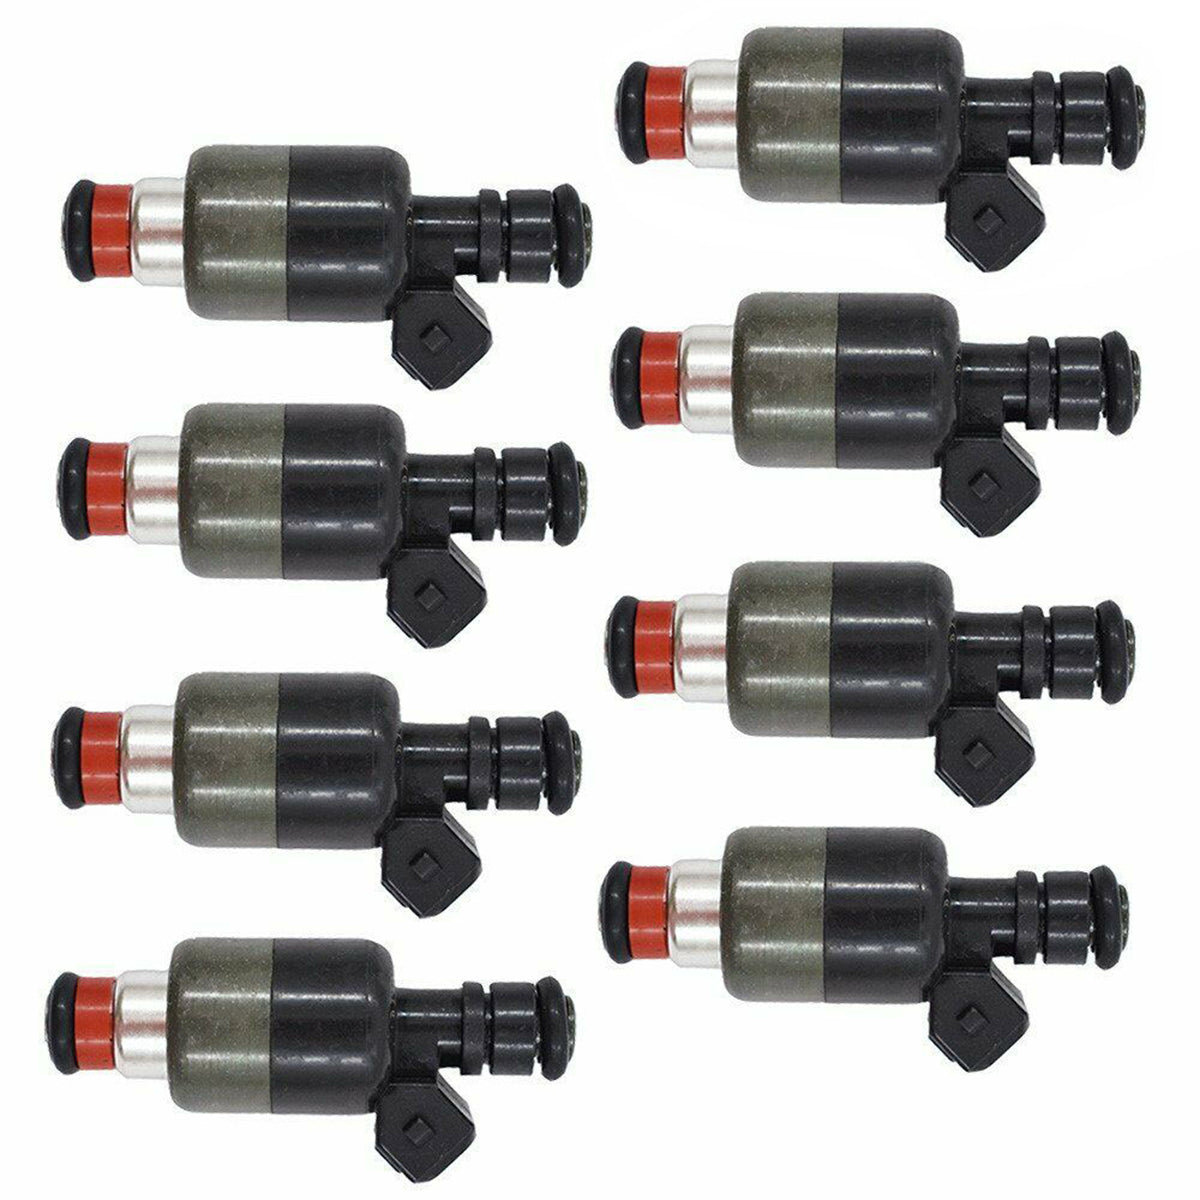 Rochester Fuel Injector 17095004 for 1994-1997 Chevrolet Buick Pontiac Cadillac, Car Fuel Injector, Daysyore Fuel Injector